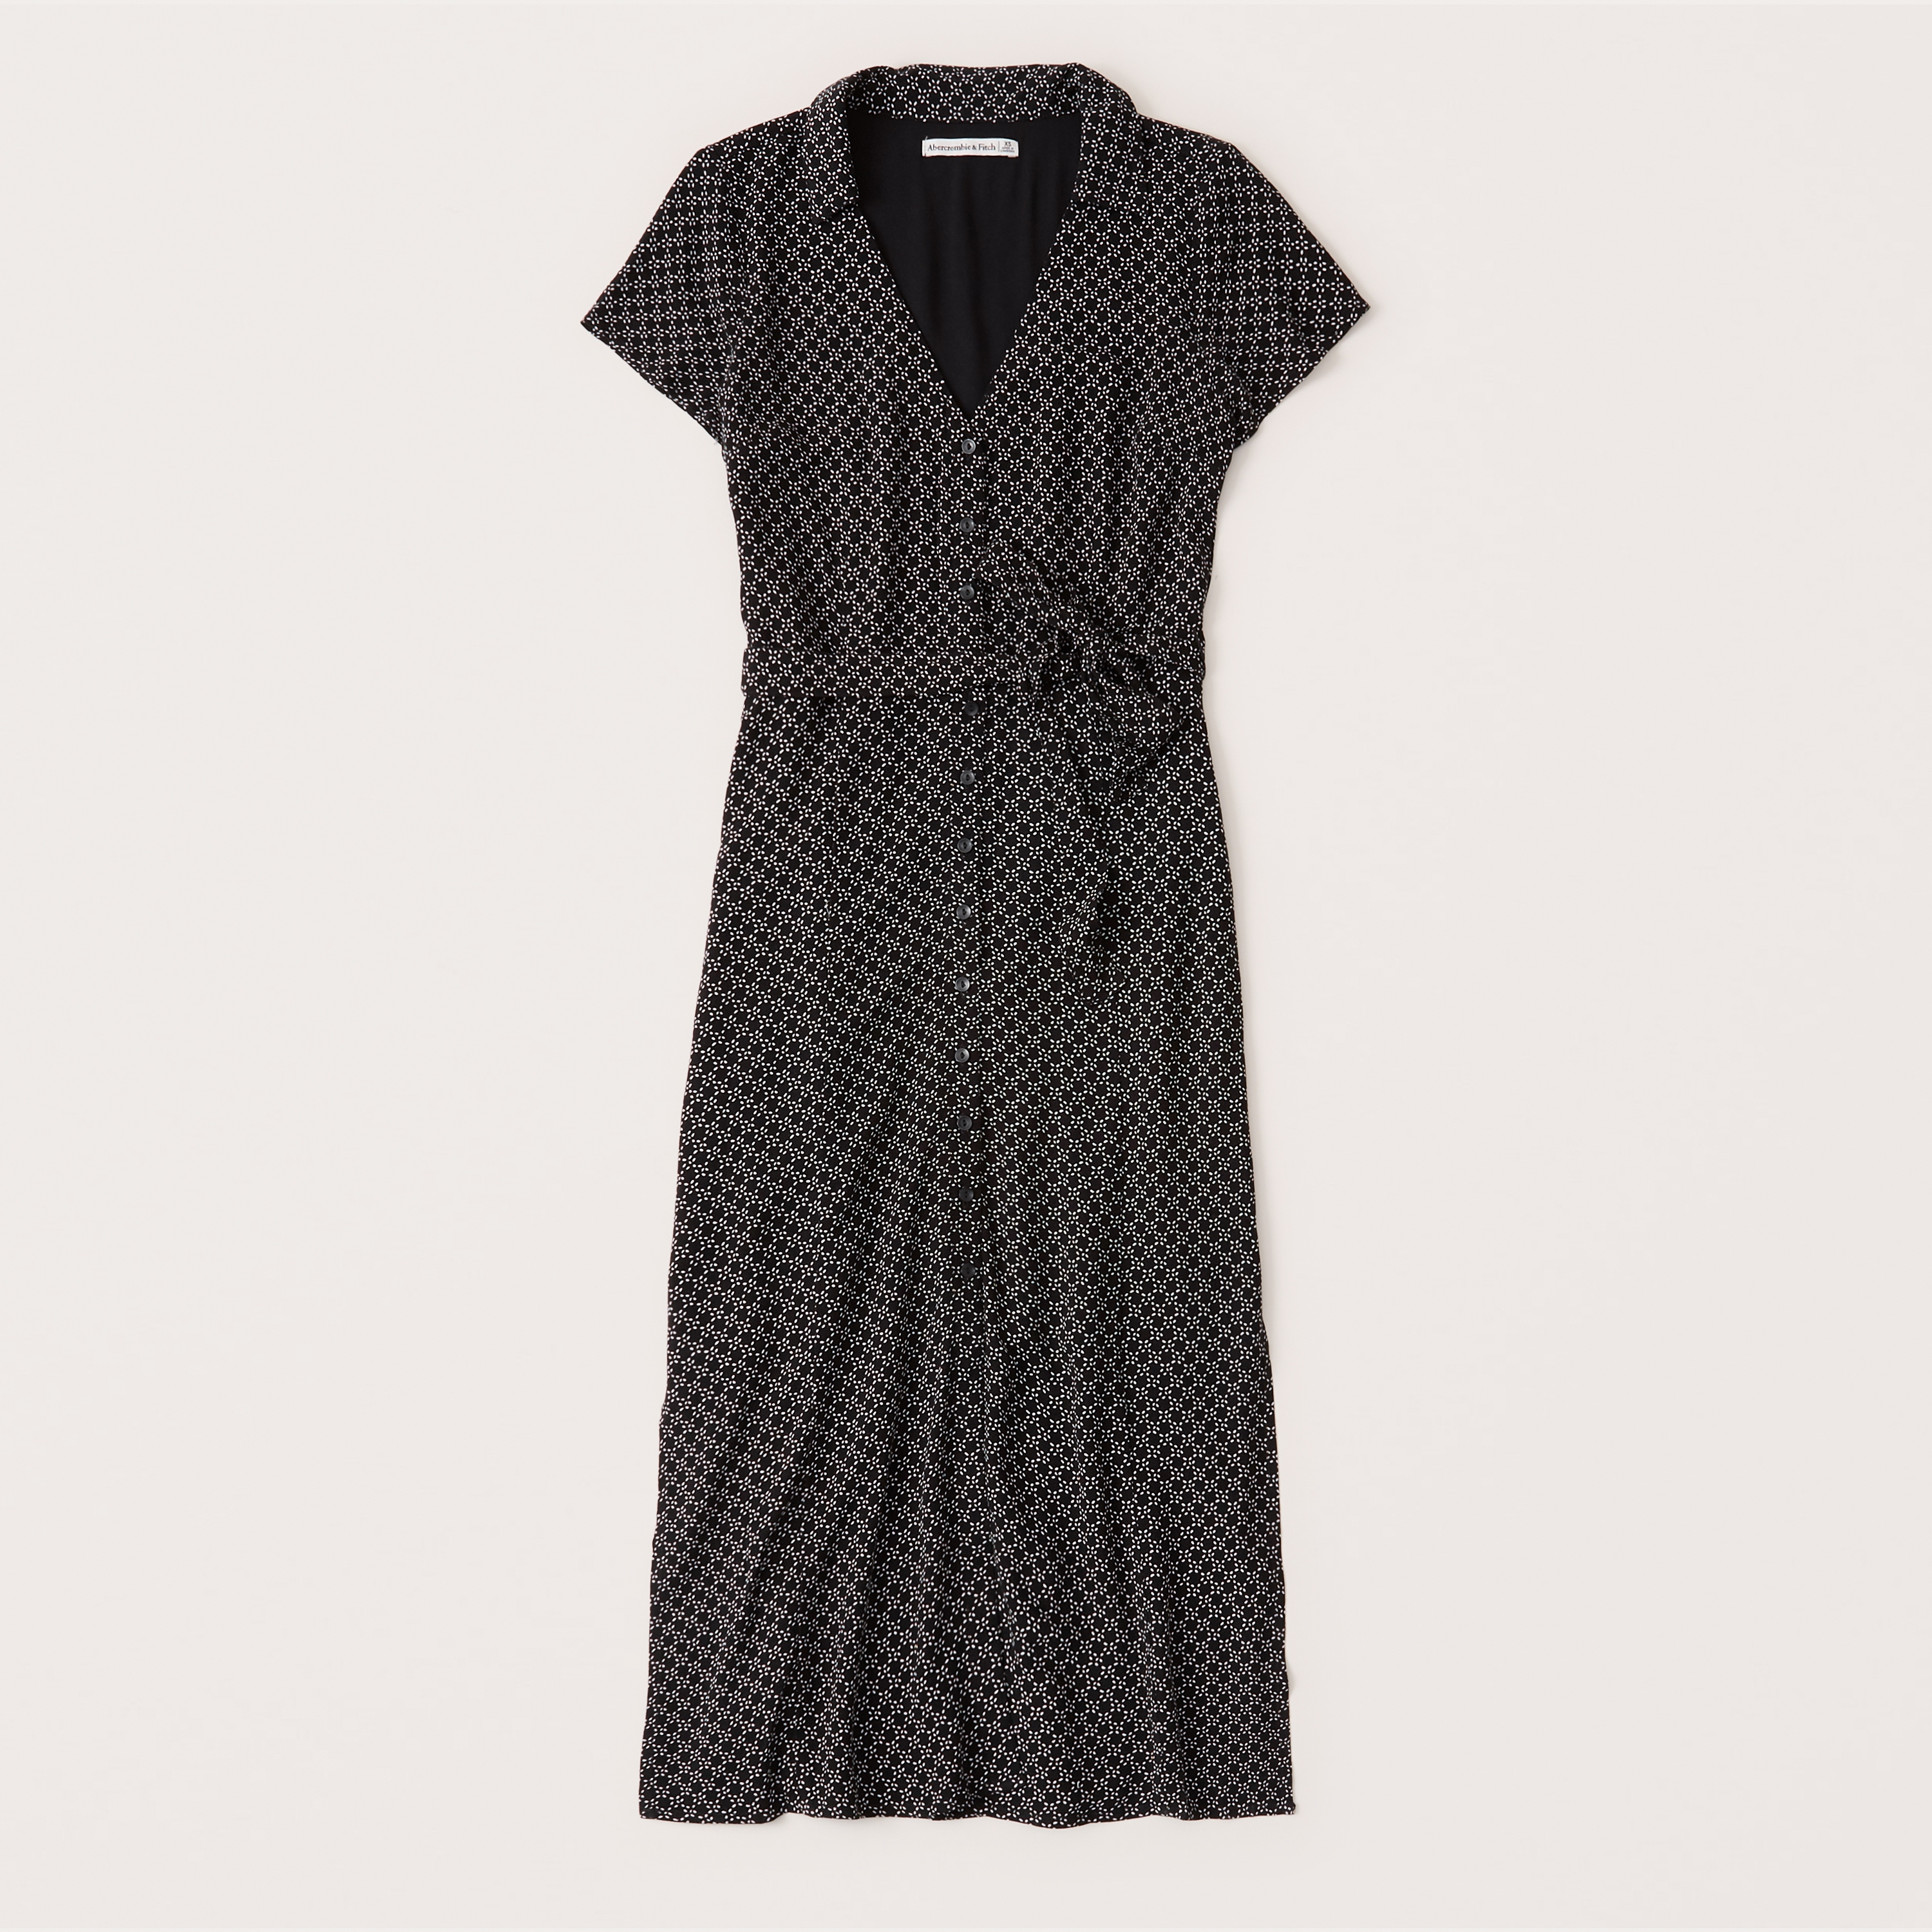 abercrombie overall dress